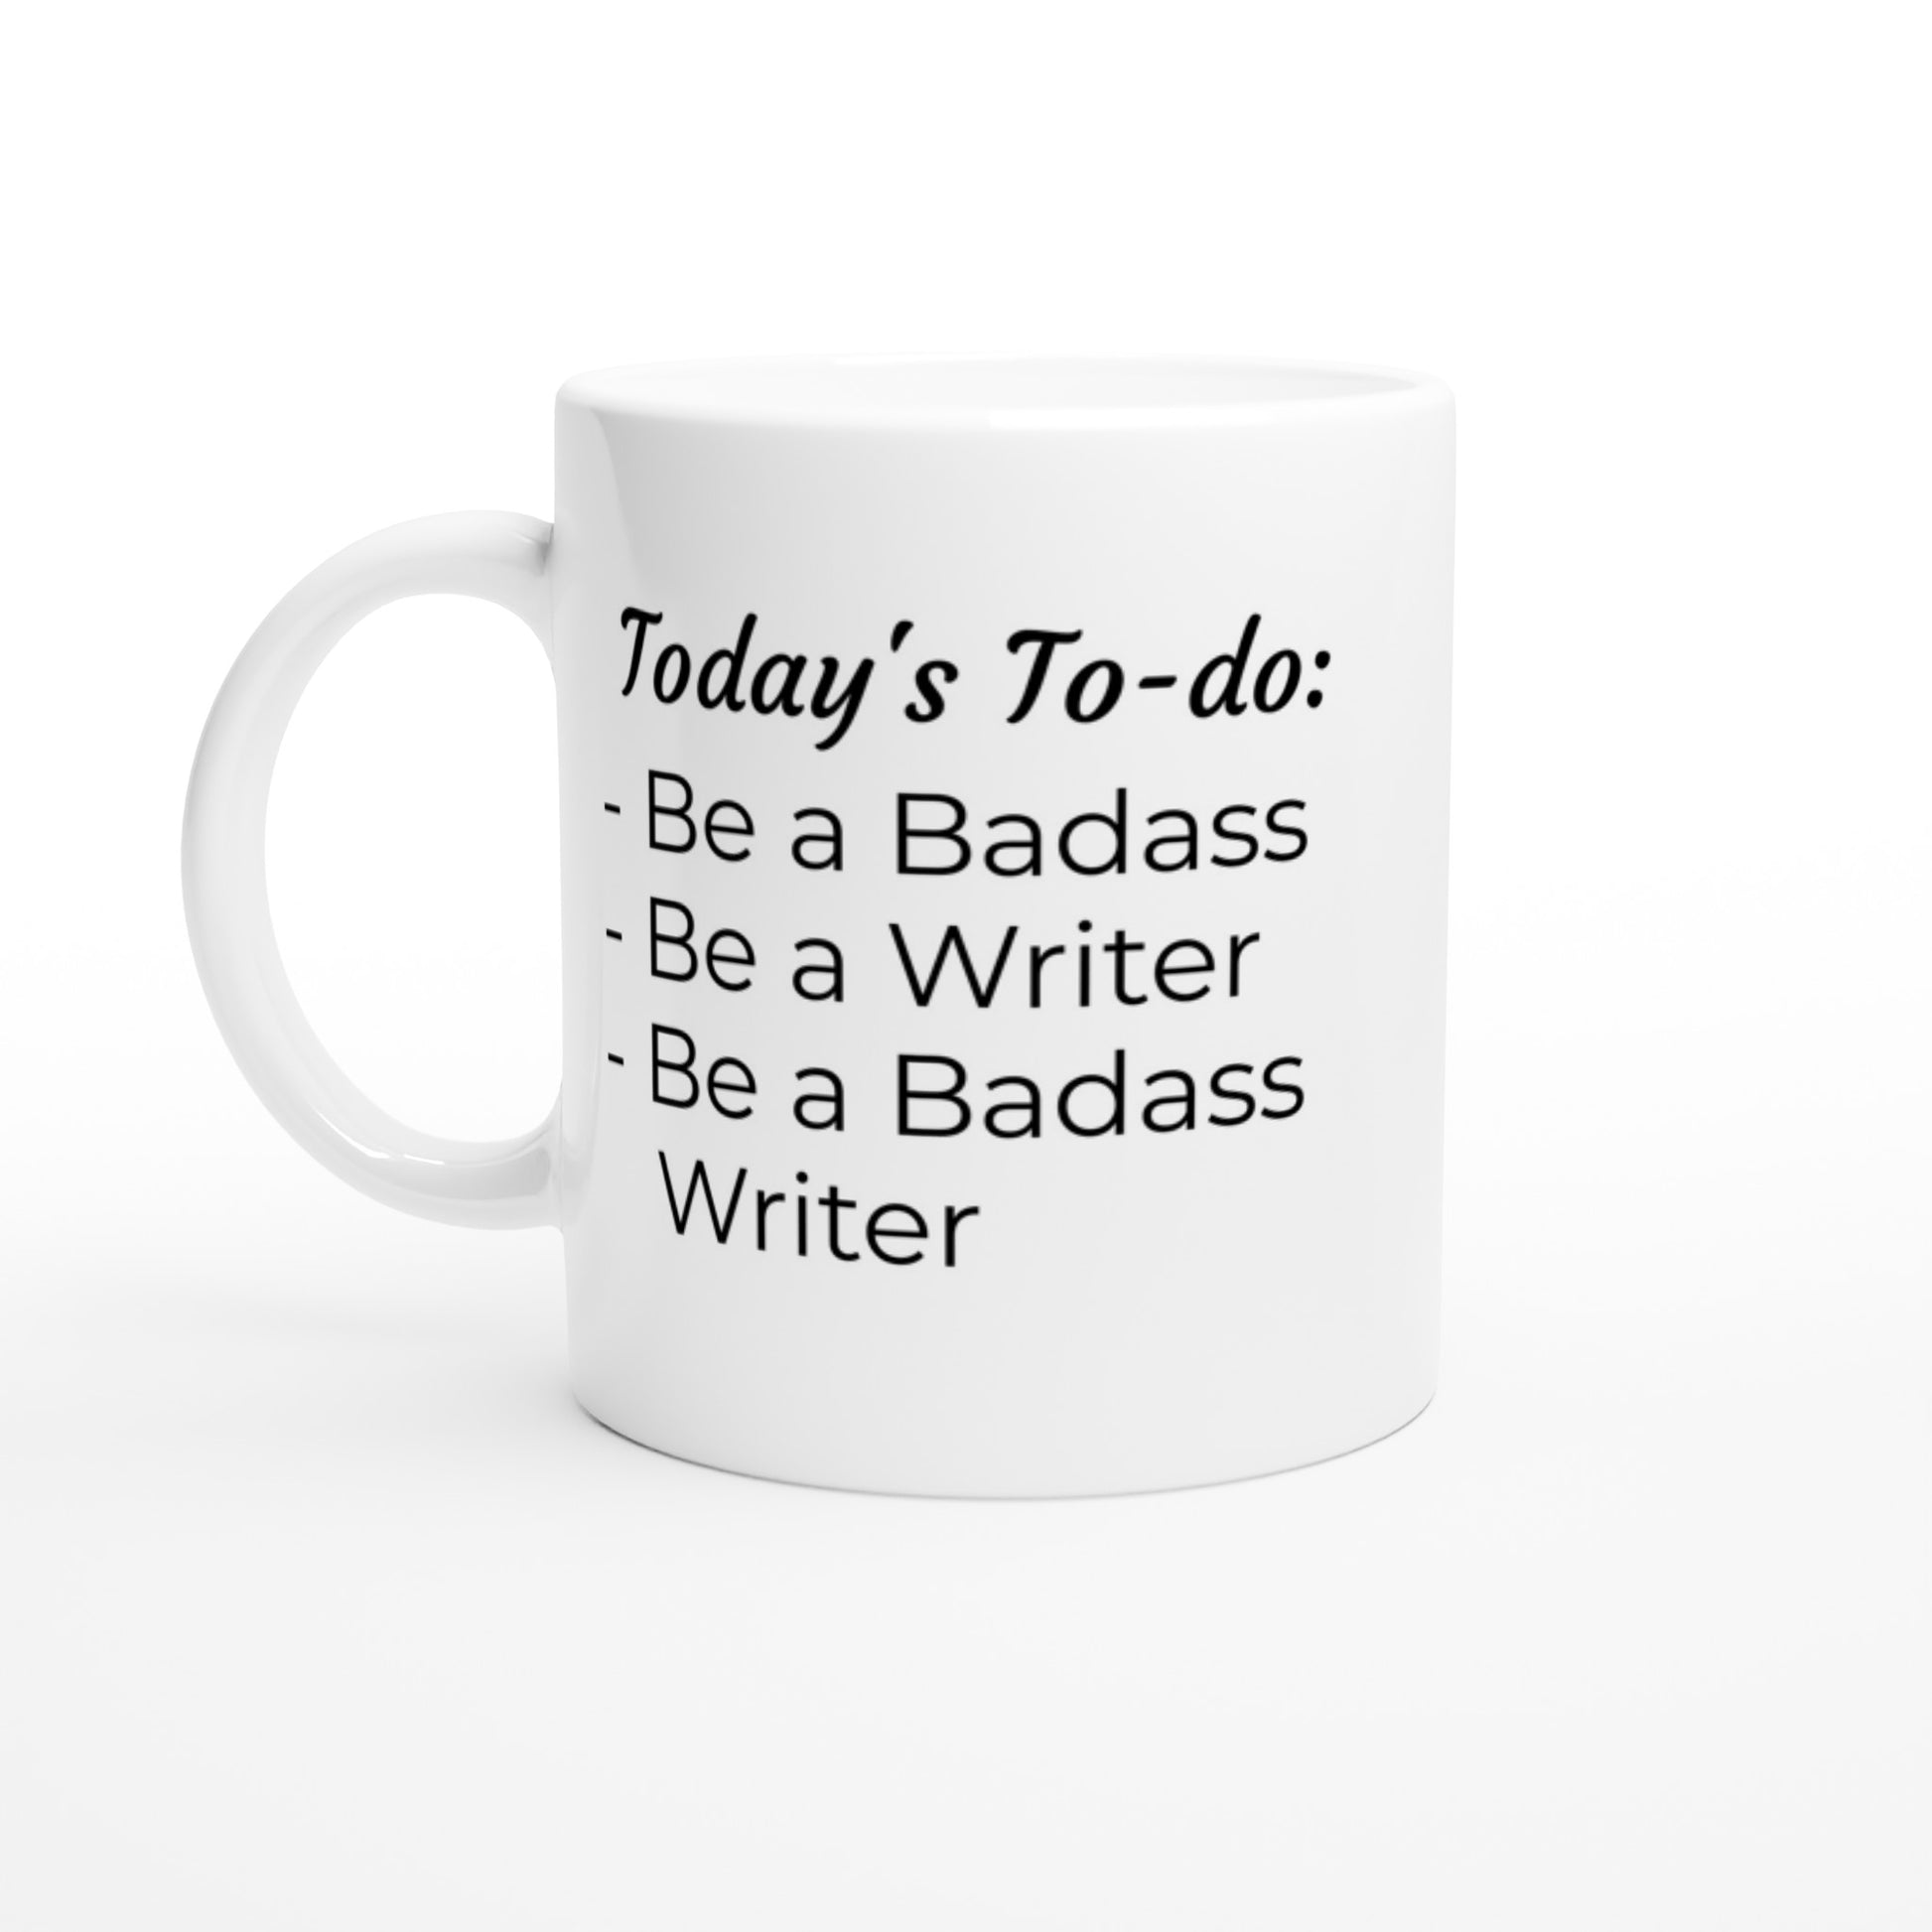 Today's to do is to be a badass writer with a Today's To-do // Writing Themed Mug that exudes determination and creativity.